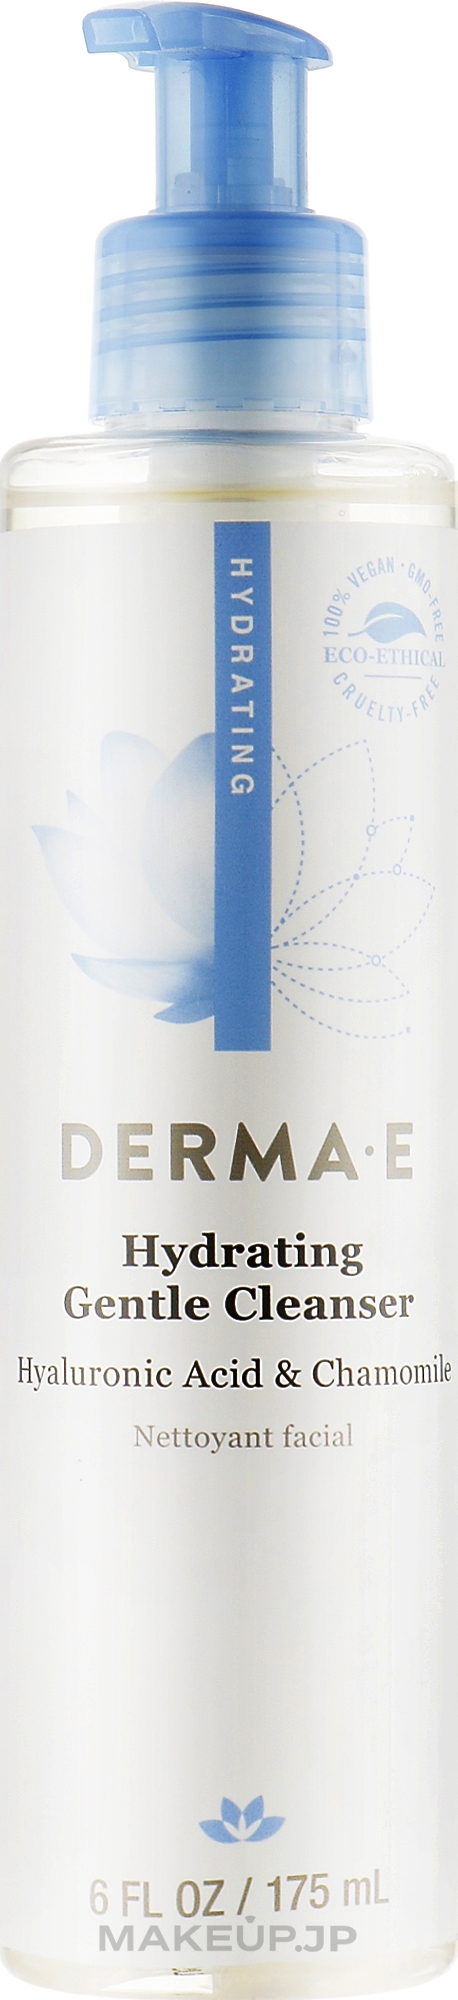 Moisturising Face Cleanser with Hyaluronic Acid - Derma E Hydrating Gentle Cleanser — photo 175 ml